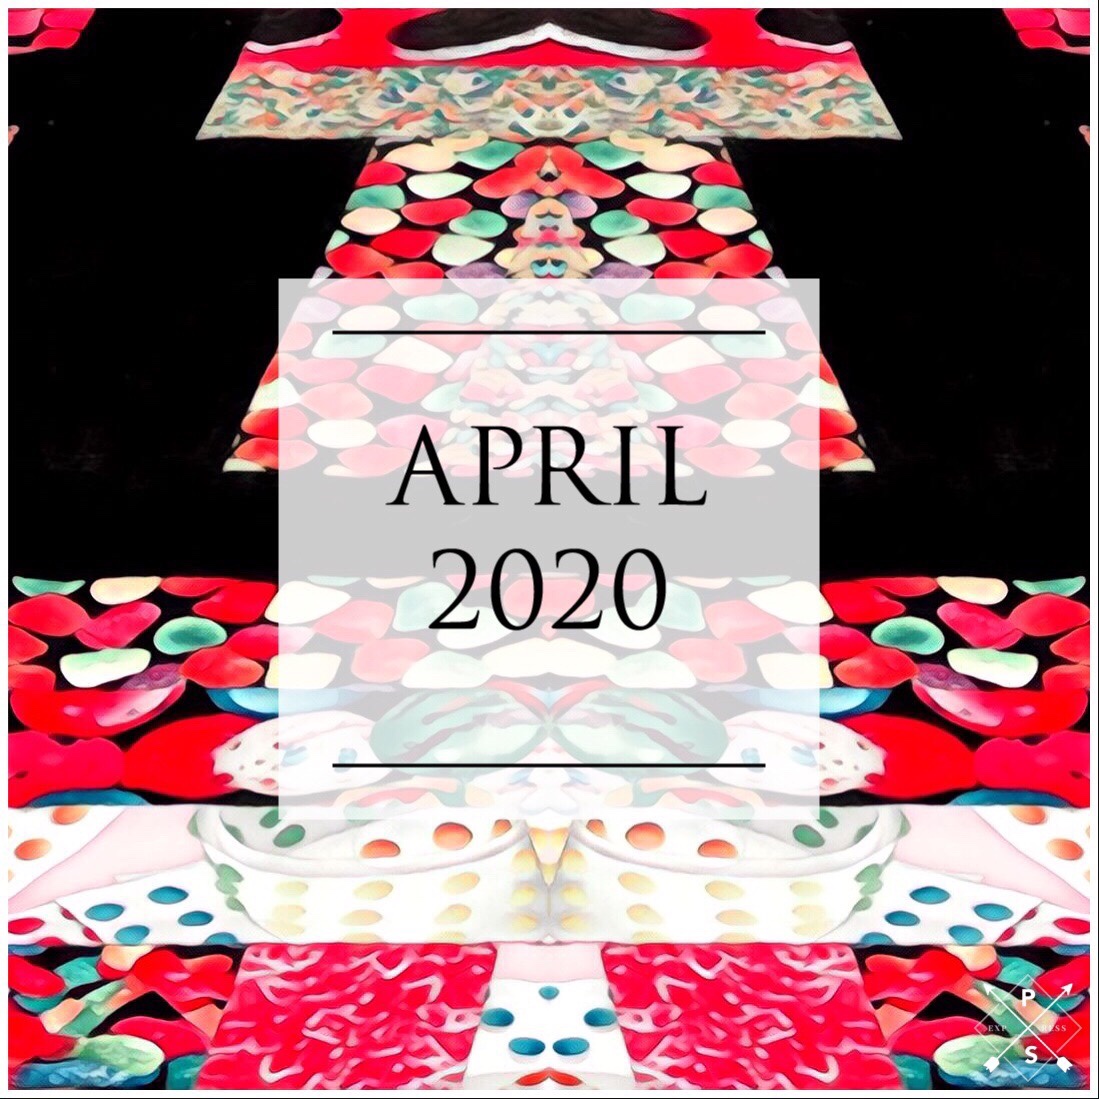 Quilt Diary:  Welcome to April and another month of COVID-19